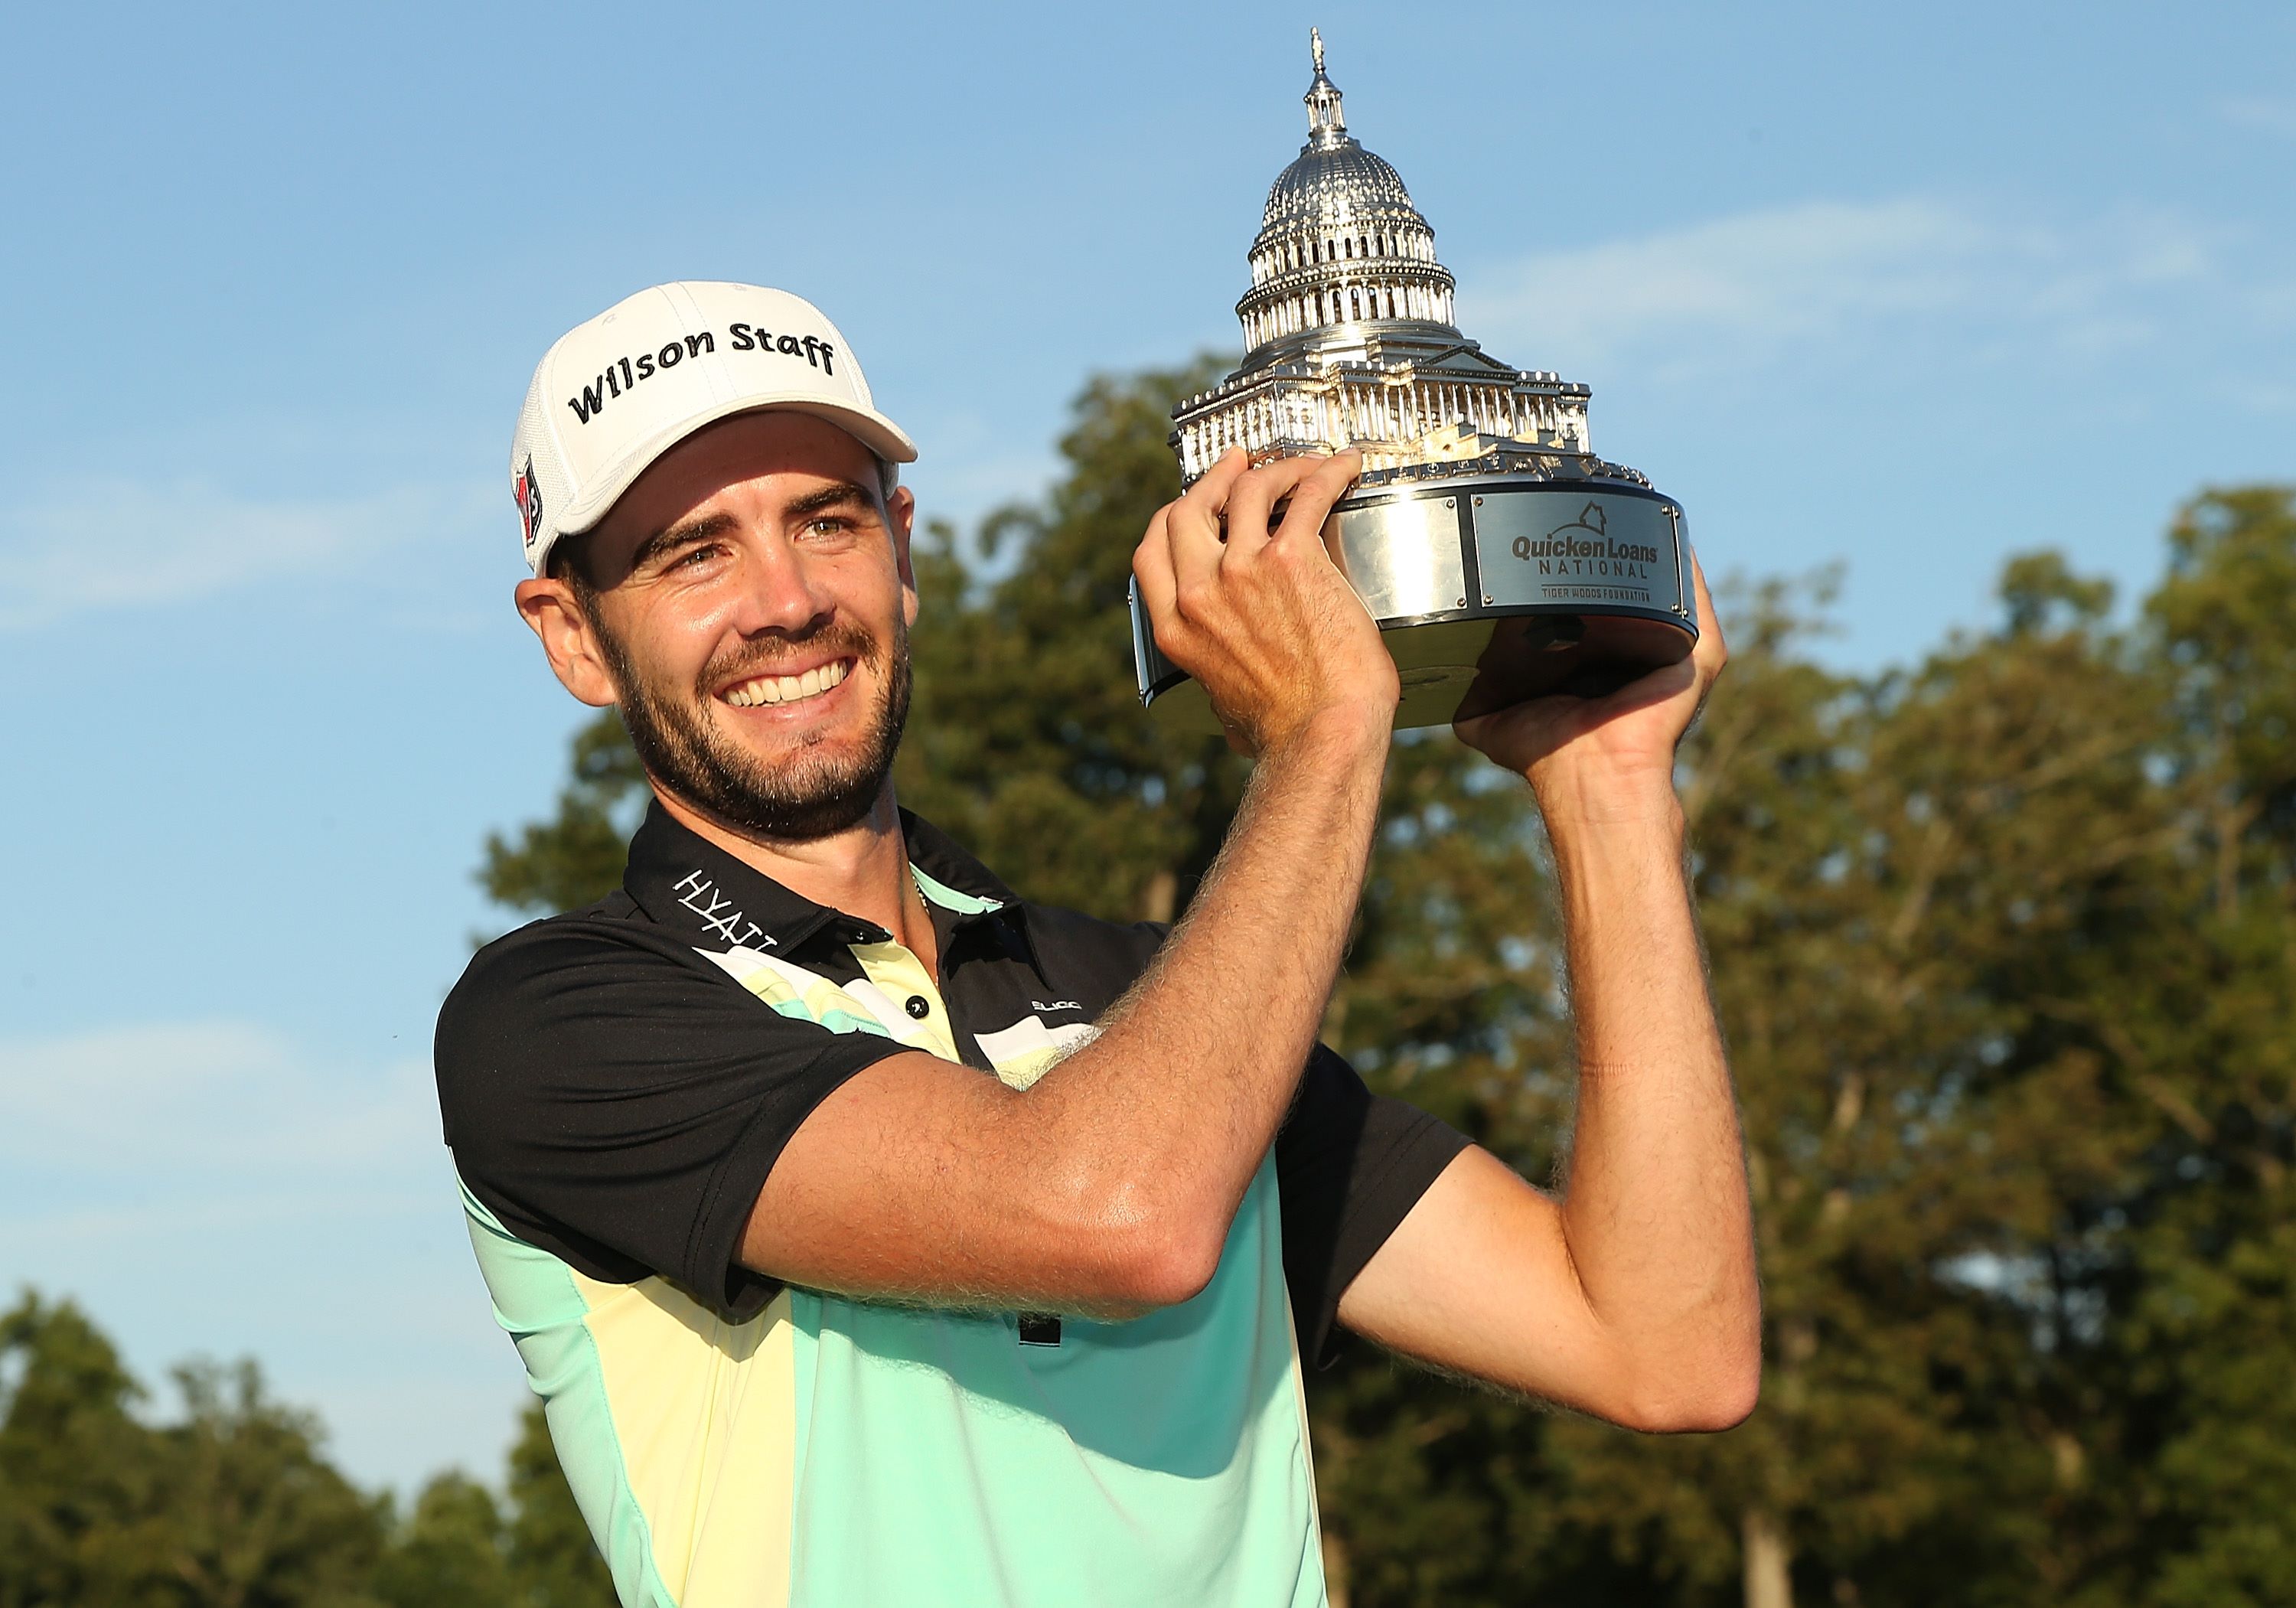 Troy Merritt celebrates with his championship trophy after winning the Quicken Loans National at the Robert Trent Jones Golf Club in Gainesville, Virginia on Sunday. Photo: AFP